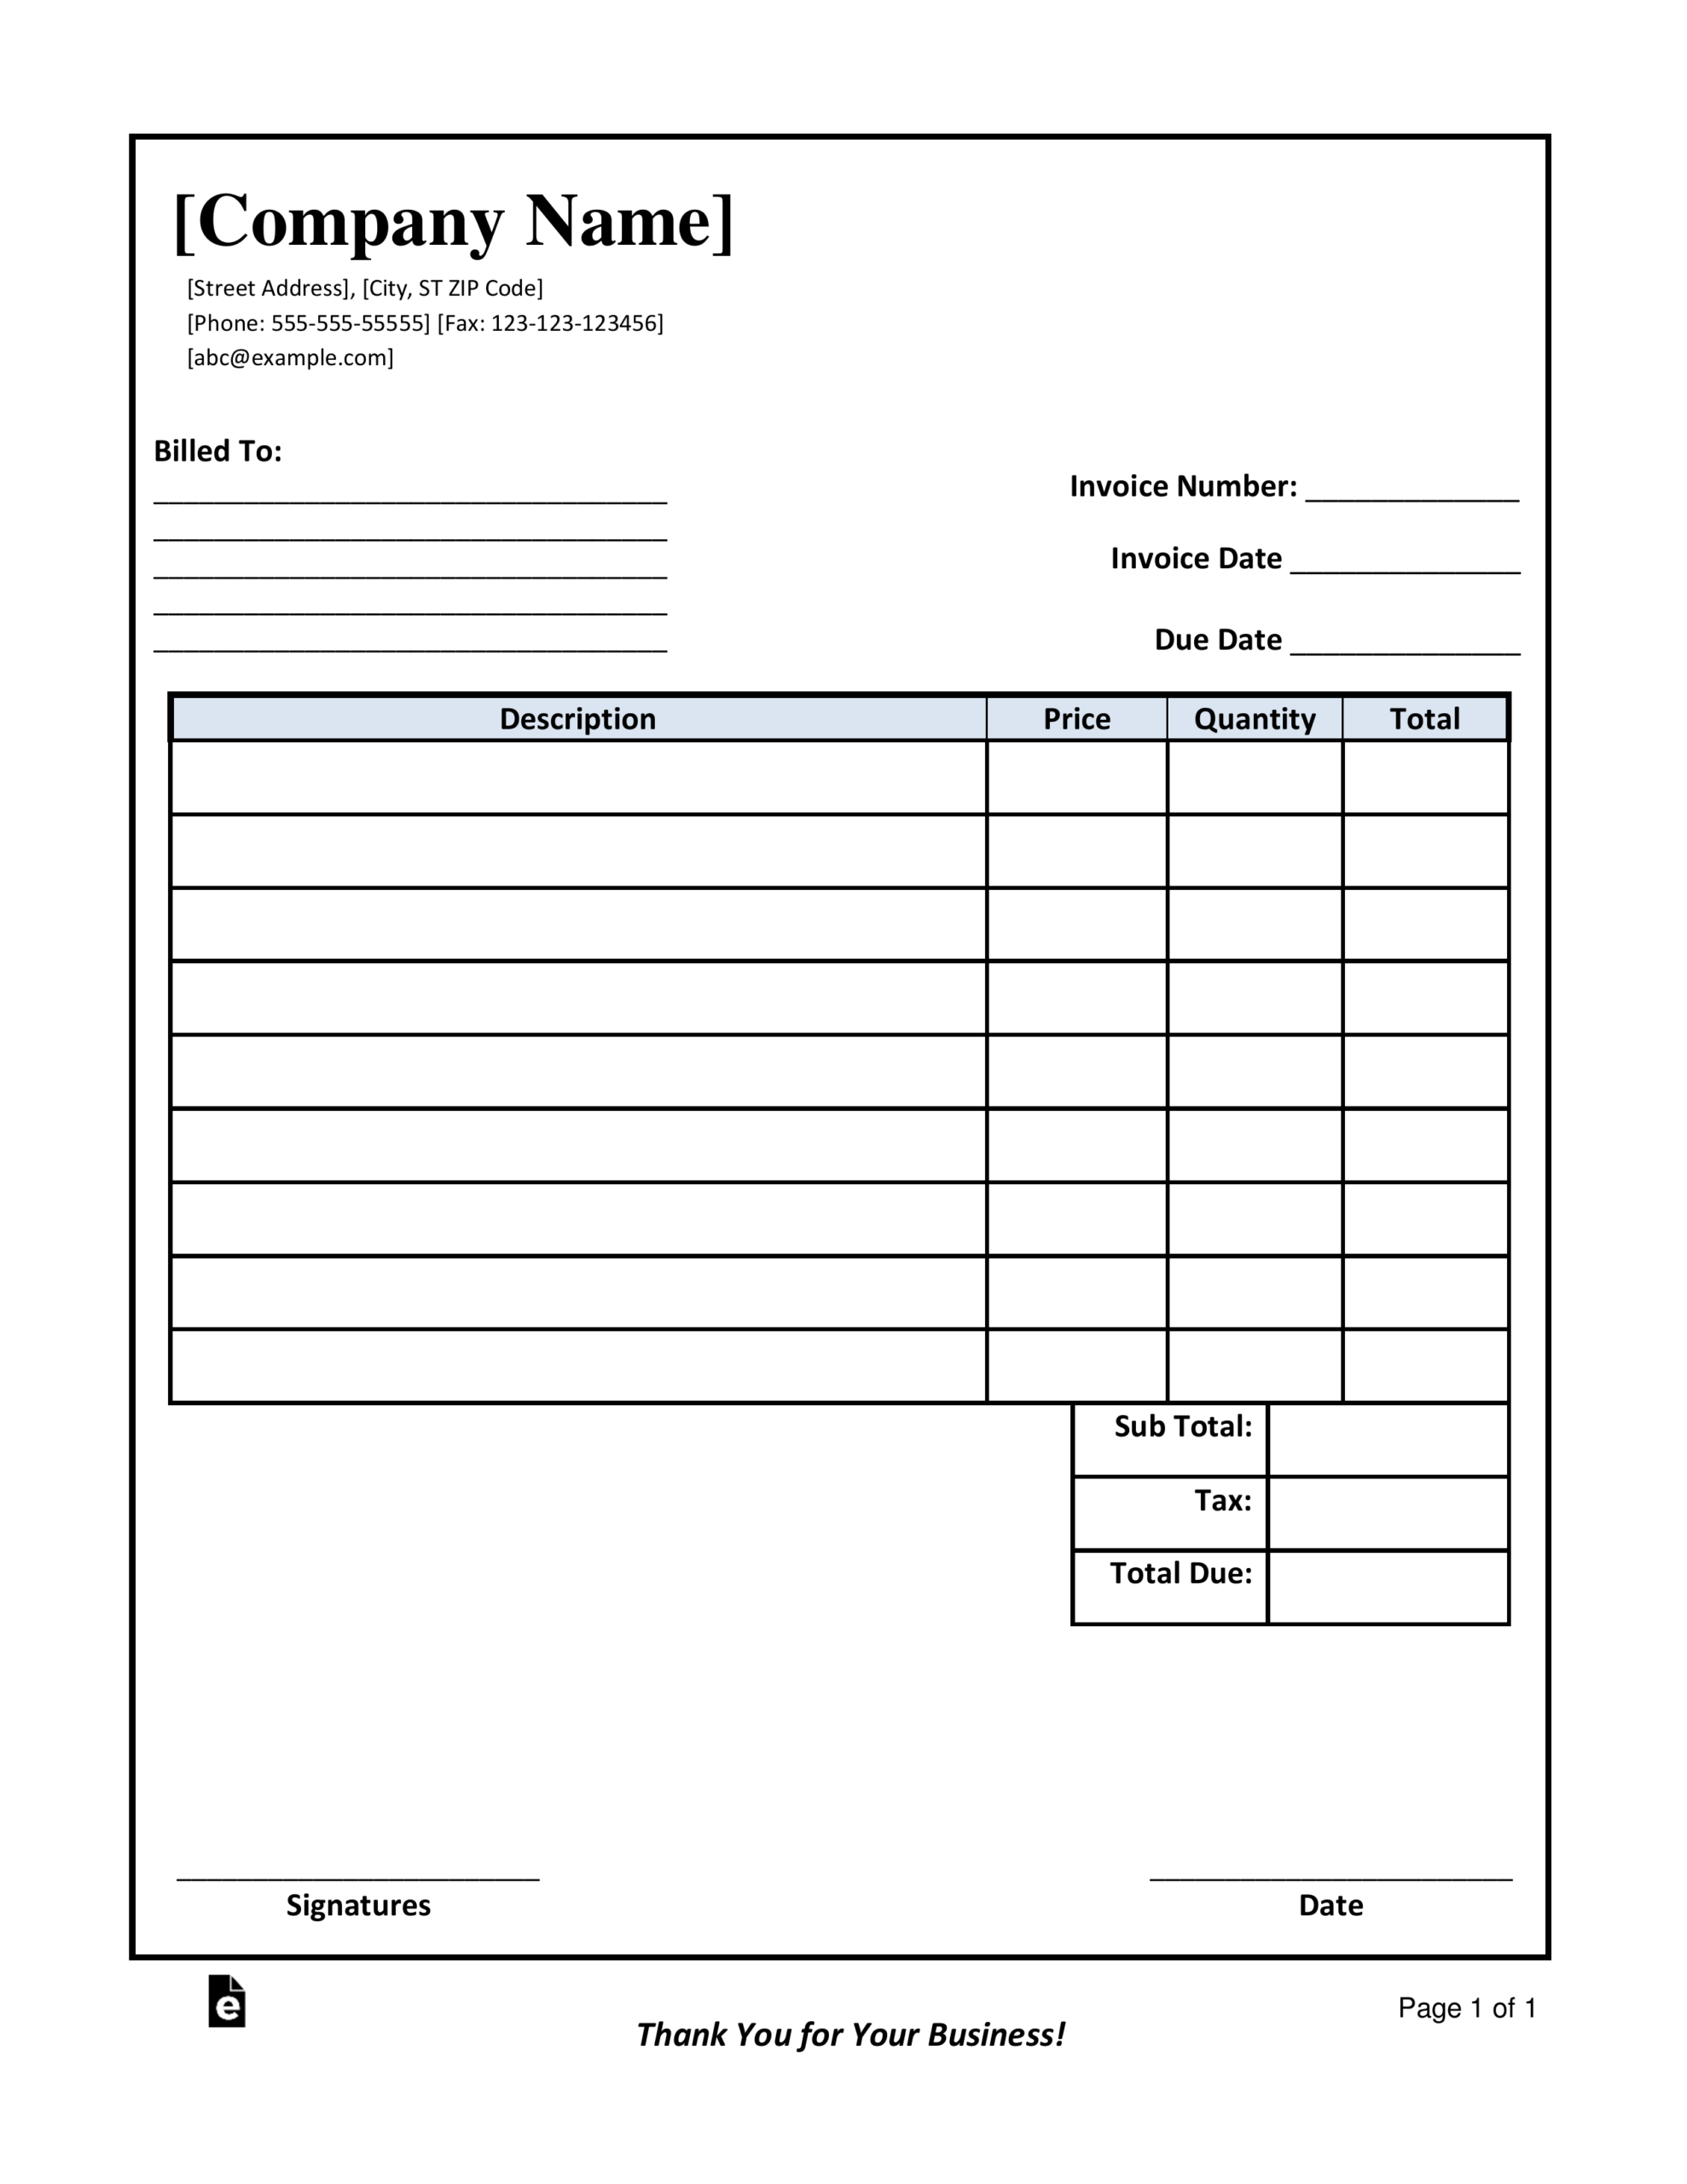 Supplier Invoice Template